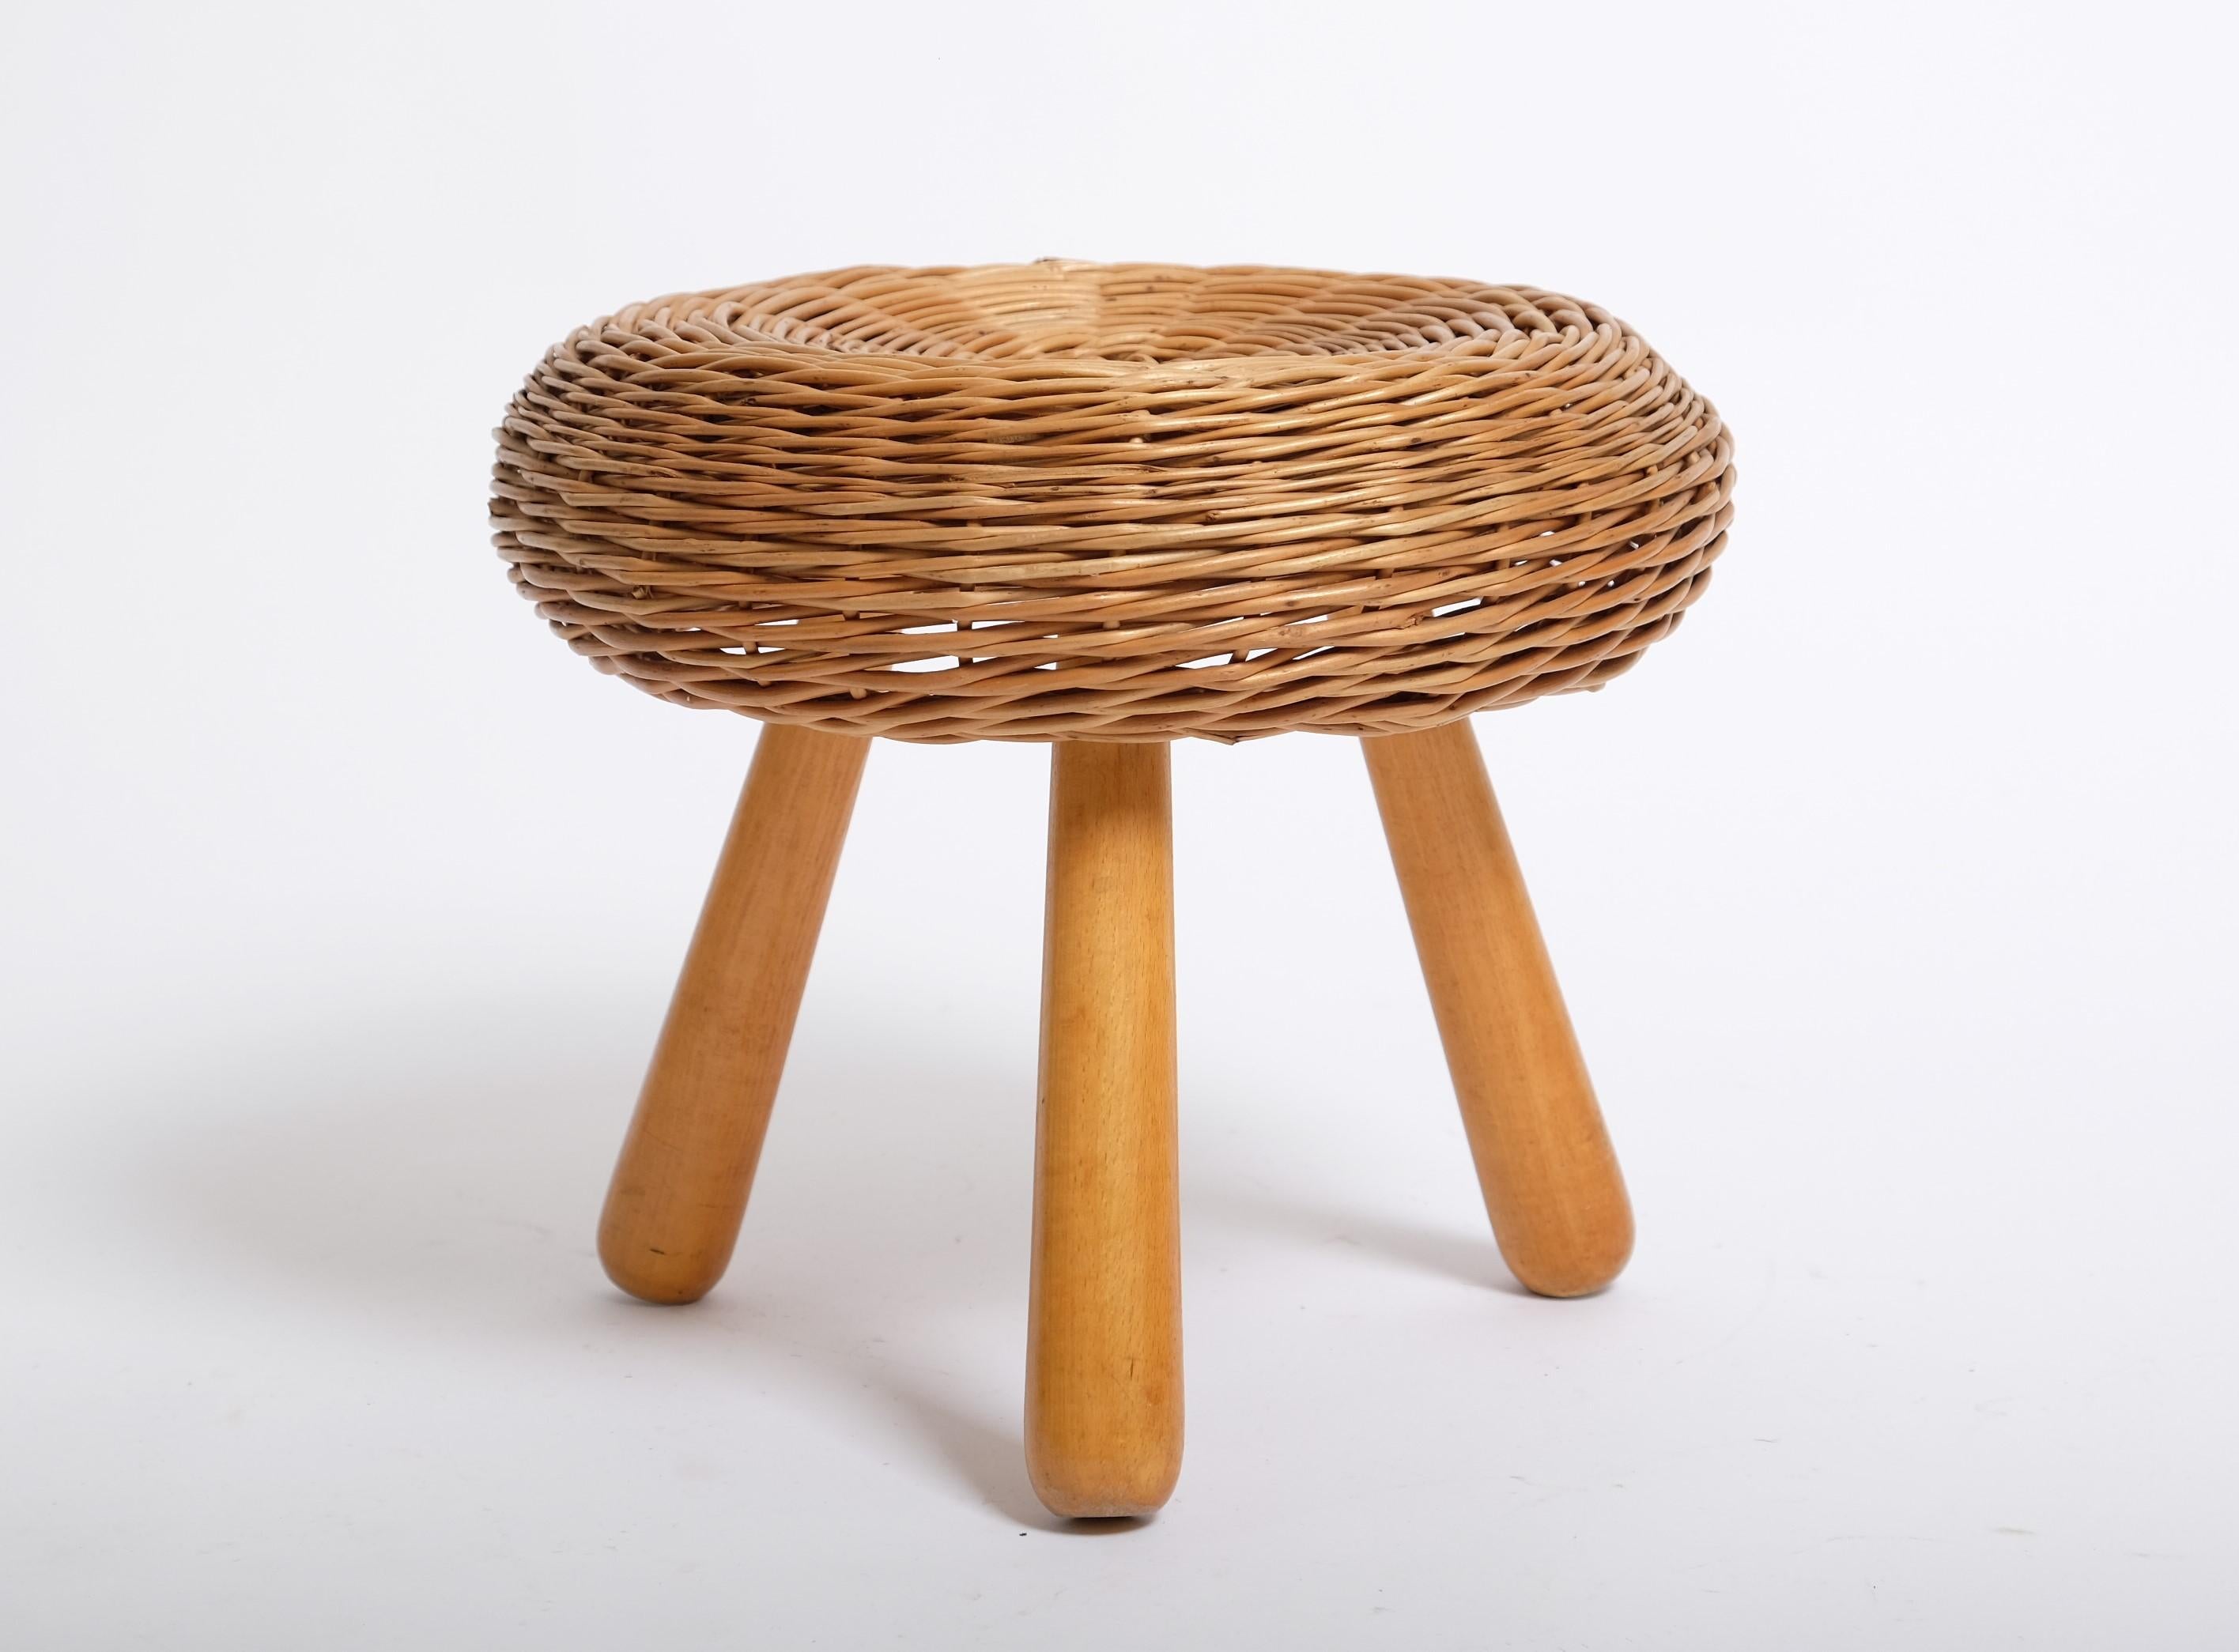 American Tony Paul 'Attributed' Stool Wicker Wood, United States 1950s For Sale